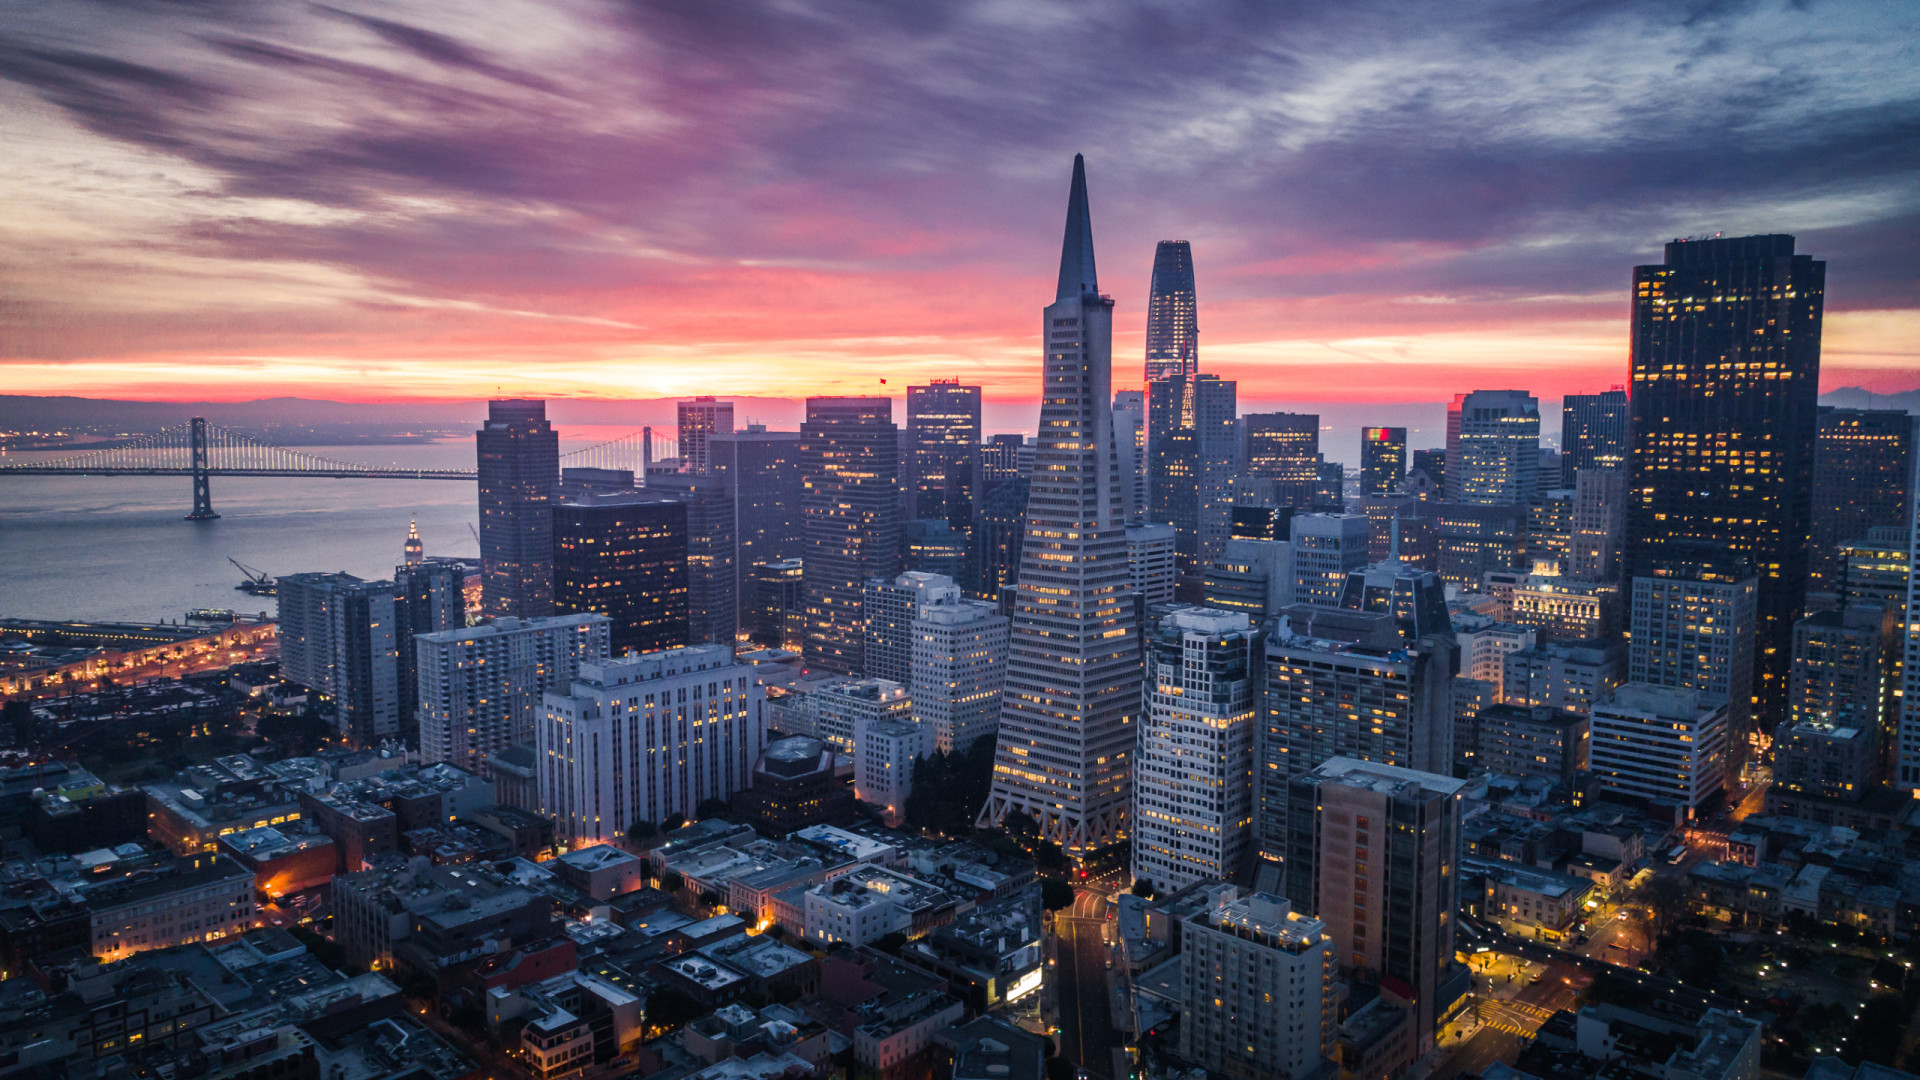 <p>San Francisco's rent index of 91.4 reflects its status as a tech and cultural hub. This vibrant city, known for steep hills and eclectic architecture, faces a housing crunch that drives up living costs.</p><p><a href="https://www.msn.com/en-in/community/channel/vid-7xx8mnucu55yw63we9va2gwr7uihbxwc68fxqp25x6tg4ftibpra?cvid=94631541bc0f4f89bfd59158d696ad7e">Follow us and access great exclusive content every day</a></p>